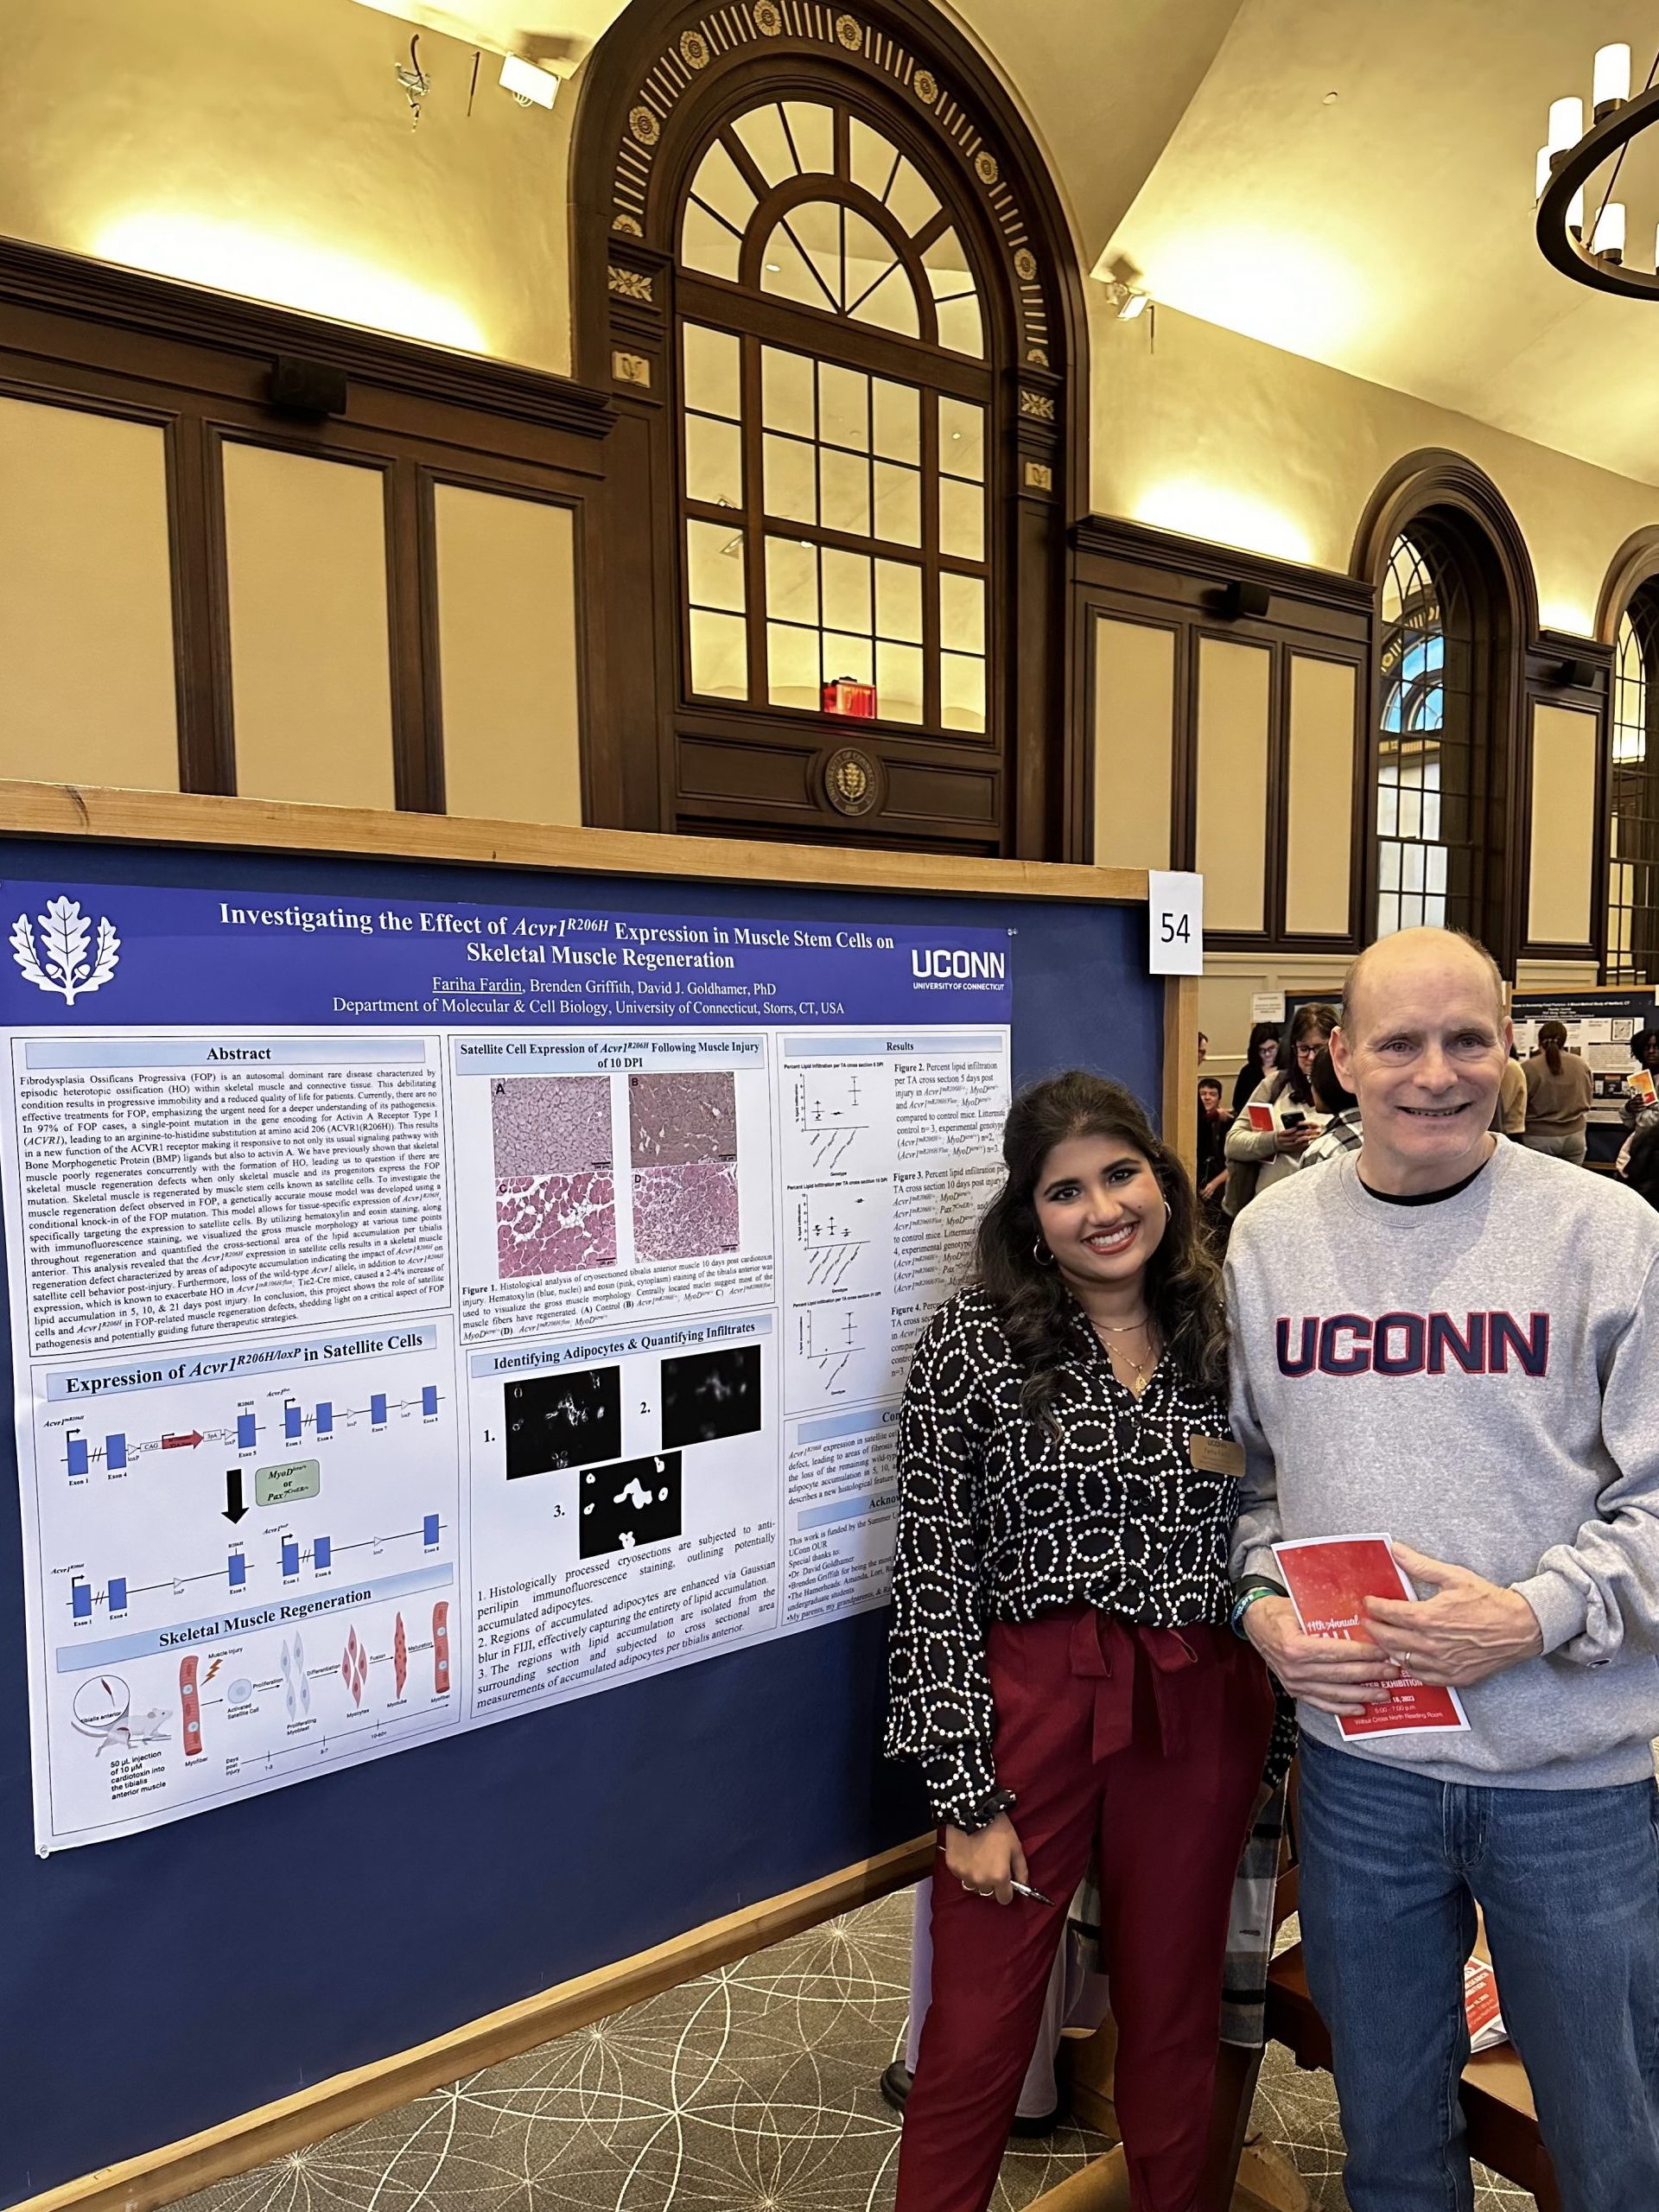 Fariha posing with Dr. Goldhamer at the Frontiers Symposium at UConn